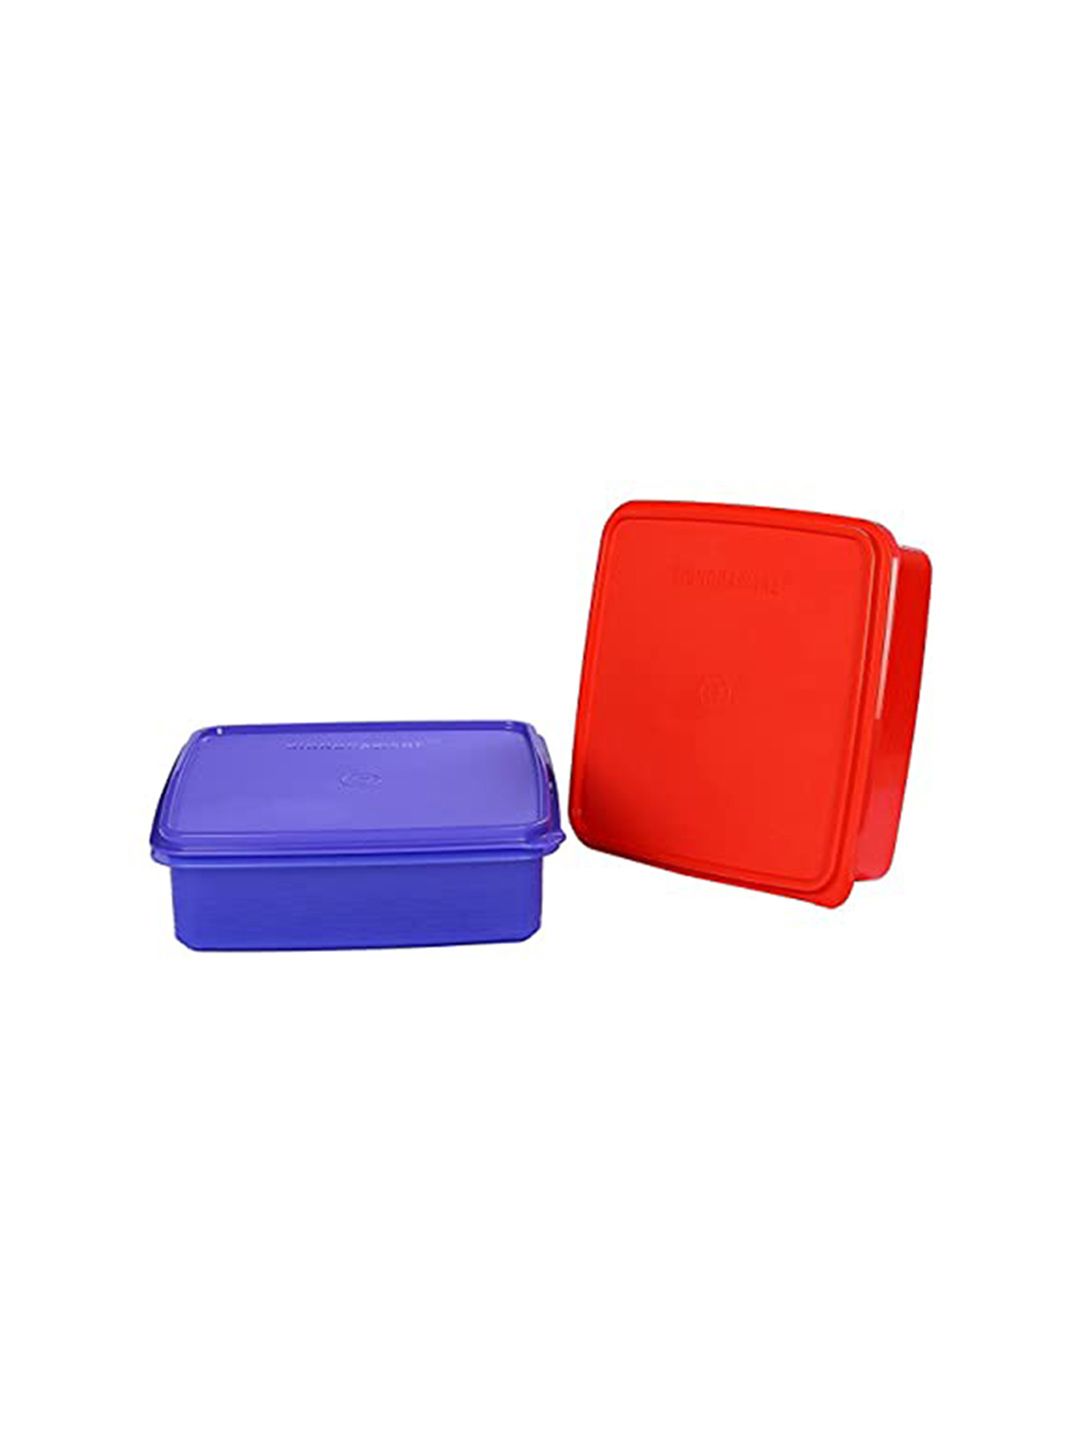 SignoraWare Set Of 2 Blue & Red Solid Plastic Storage Container With Lid Price in India